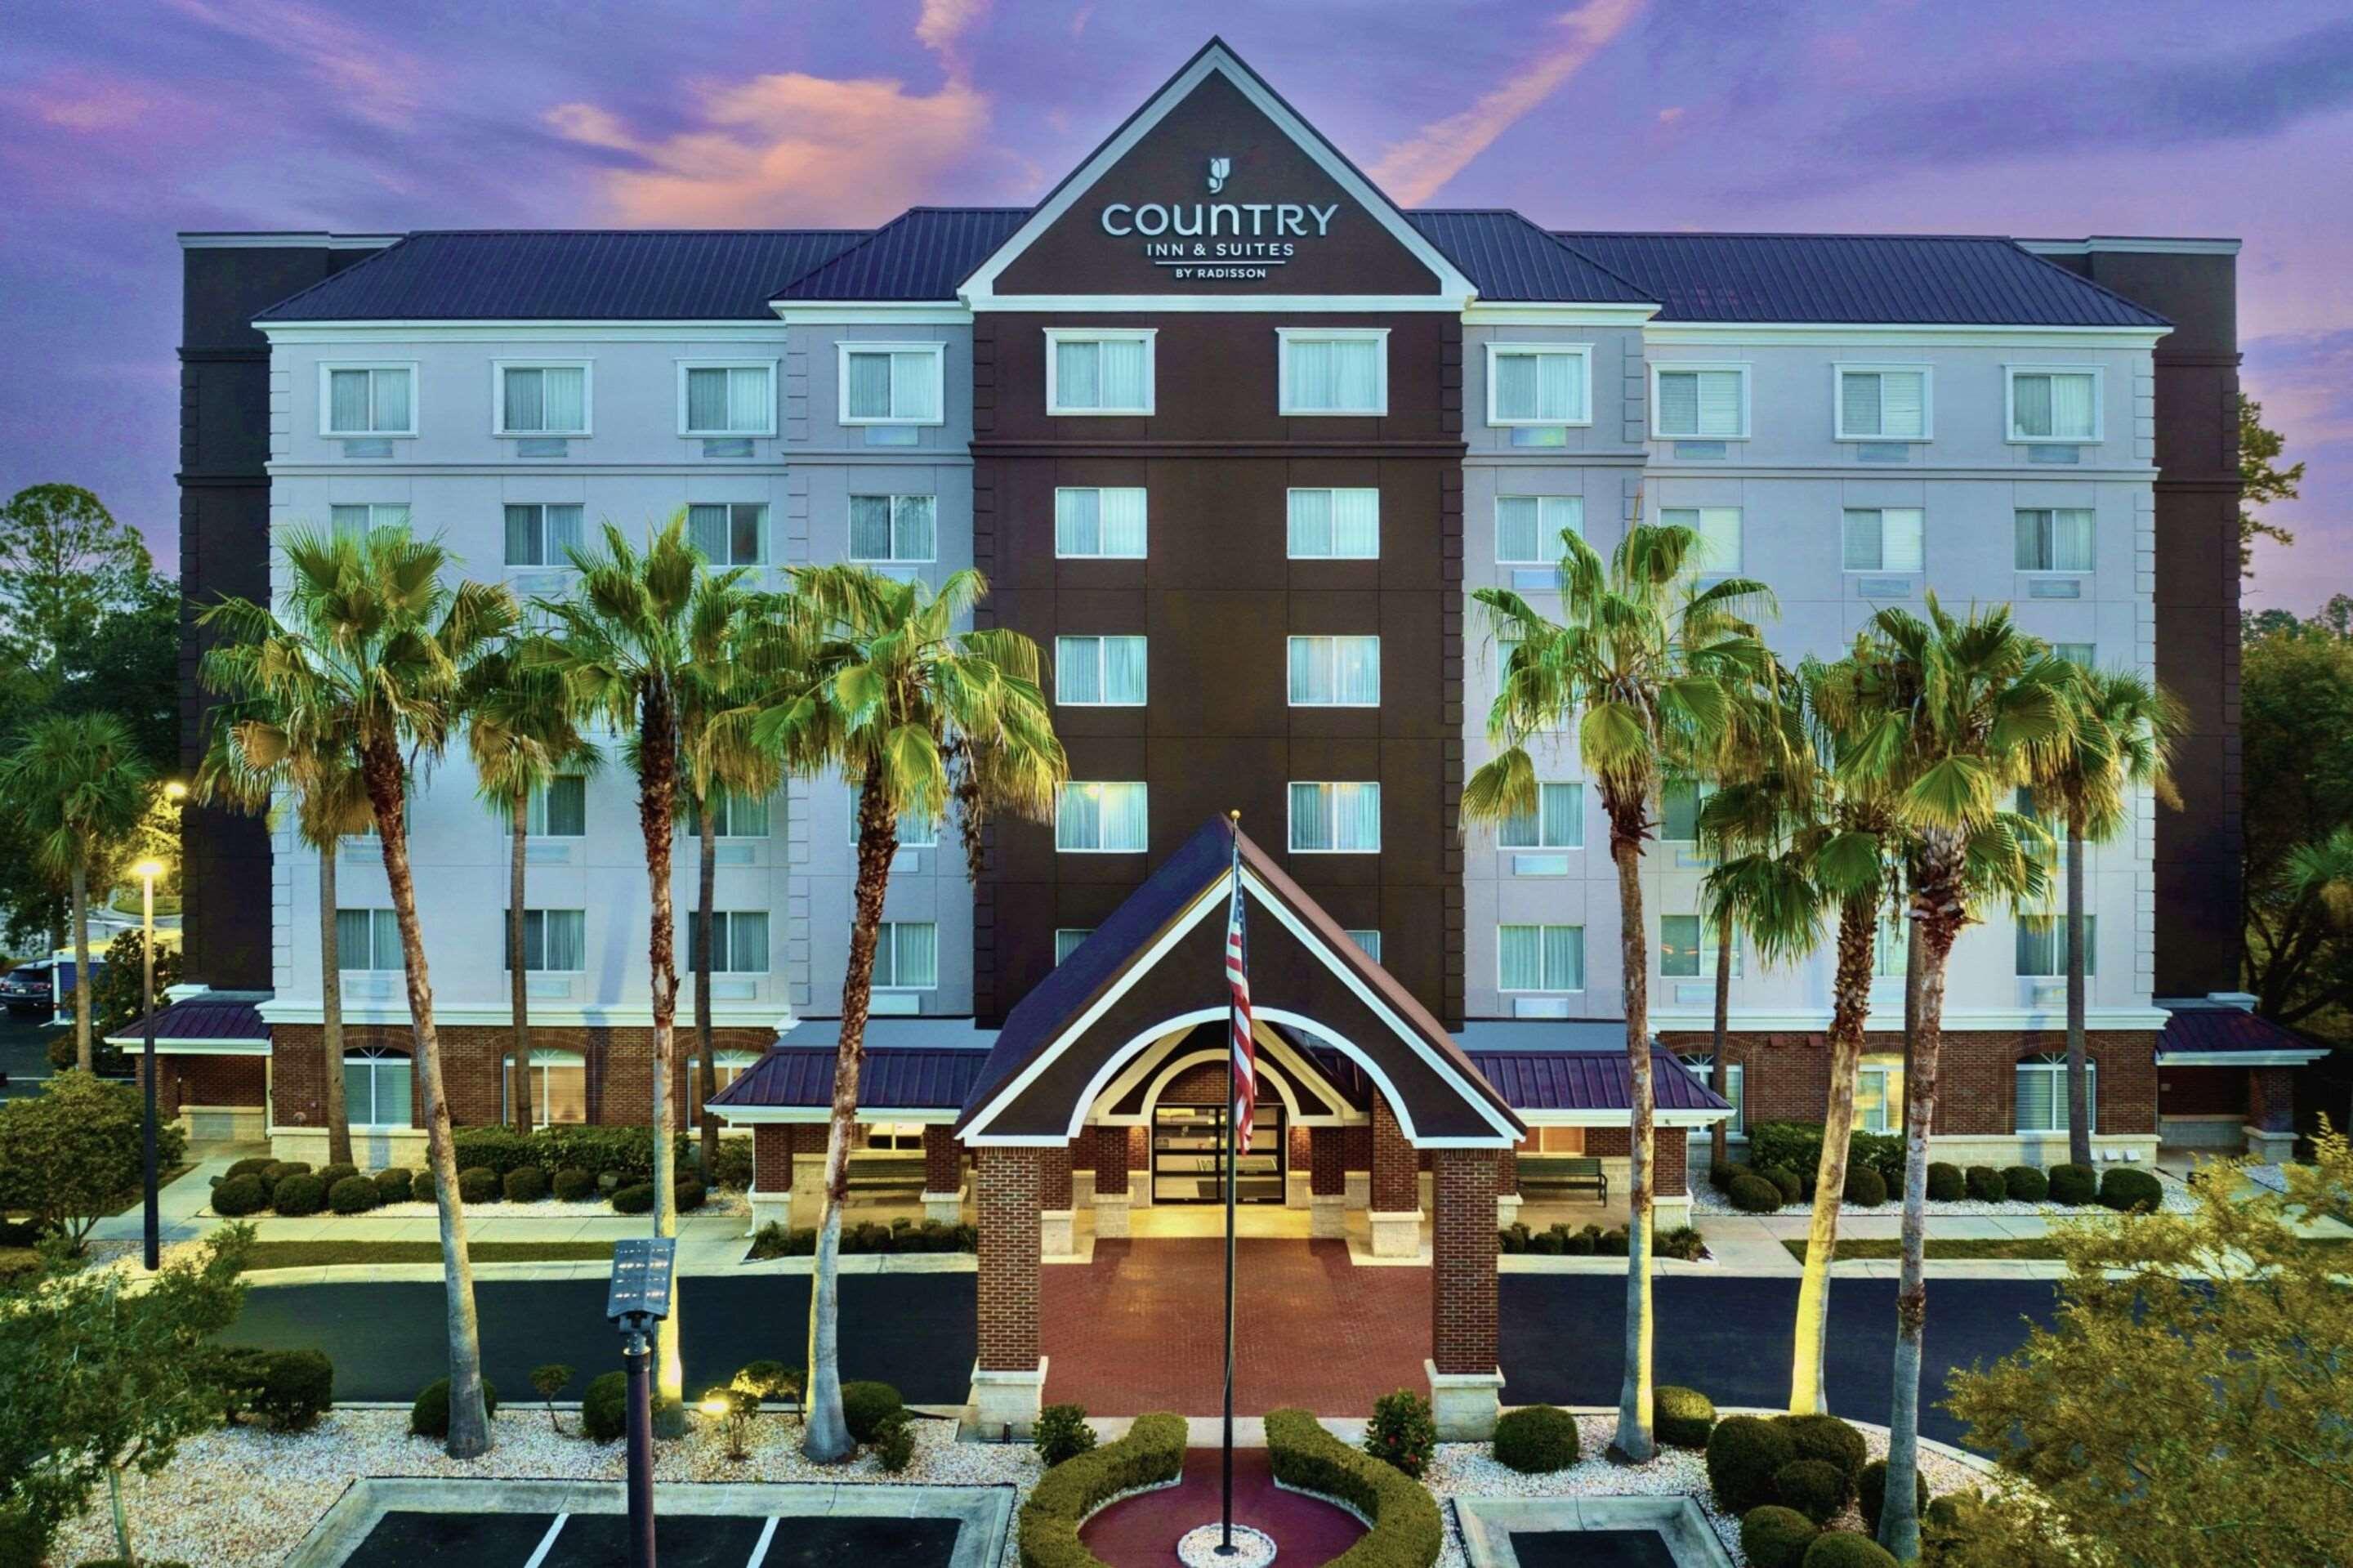 Hotel Review: Country Inn & Suites by Radisson Cape Canaveral • The Disney  Cruise Line Blog